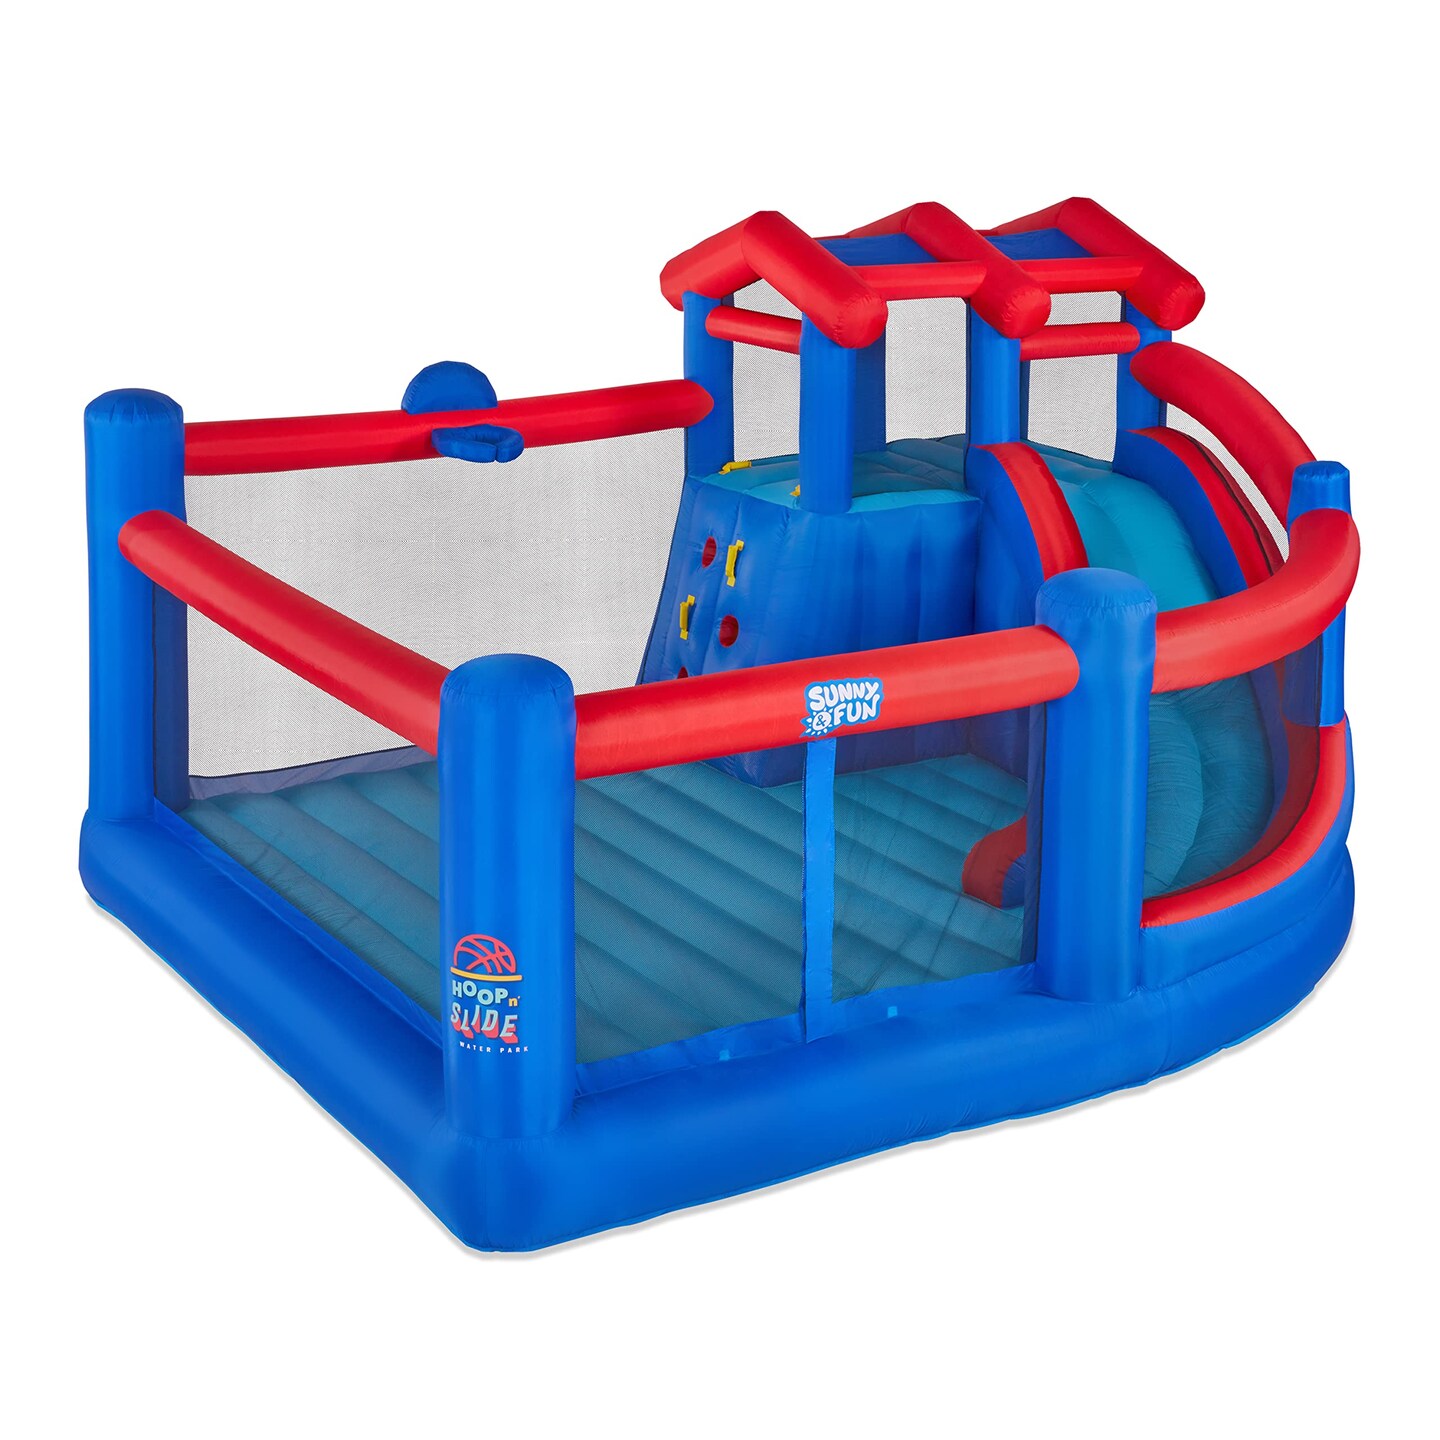 Sunny &#x26; Fun Bounce House, Inflatable Bouncy House with Slide with Included Air Pump &#x26; Carrying Case